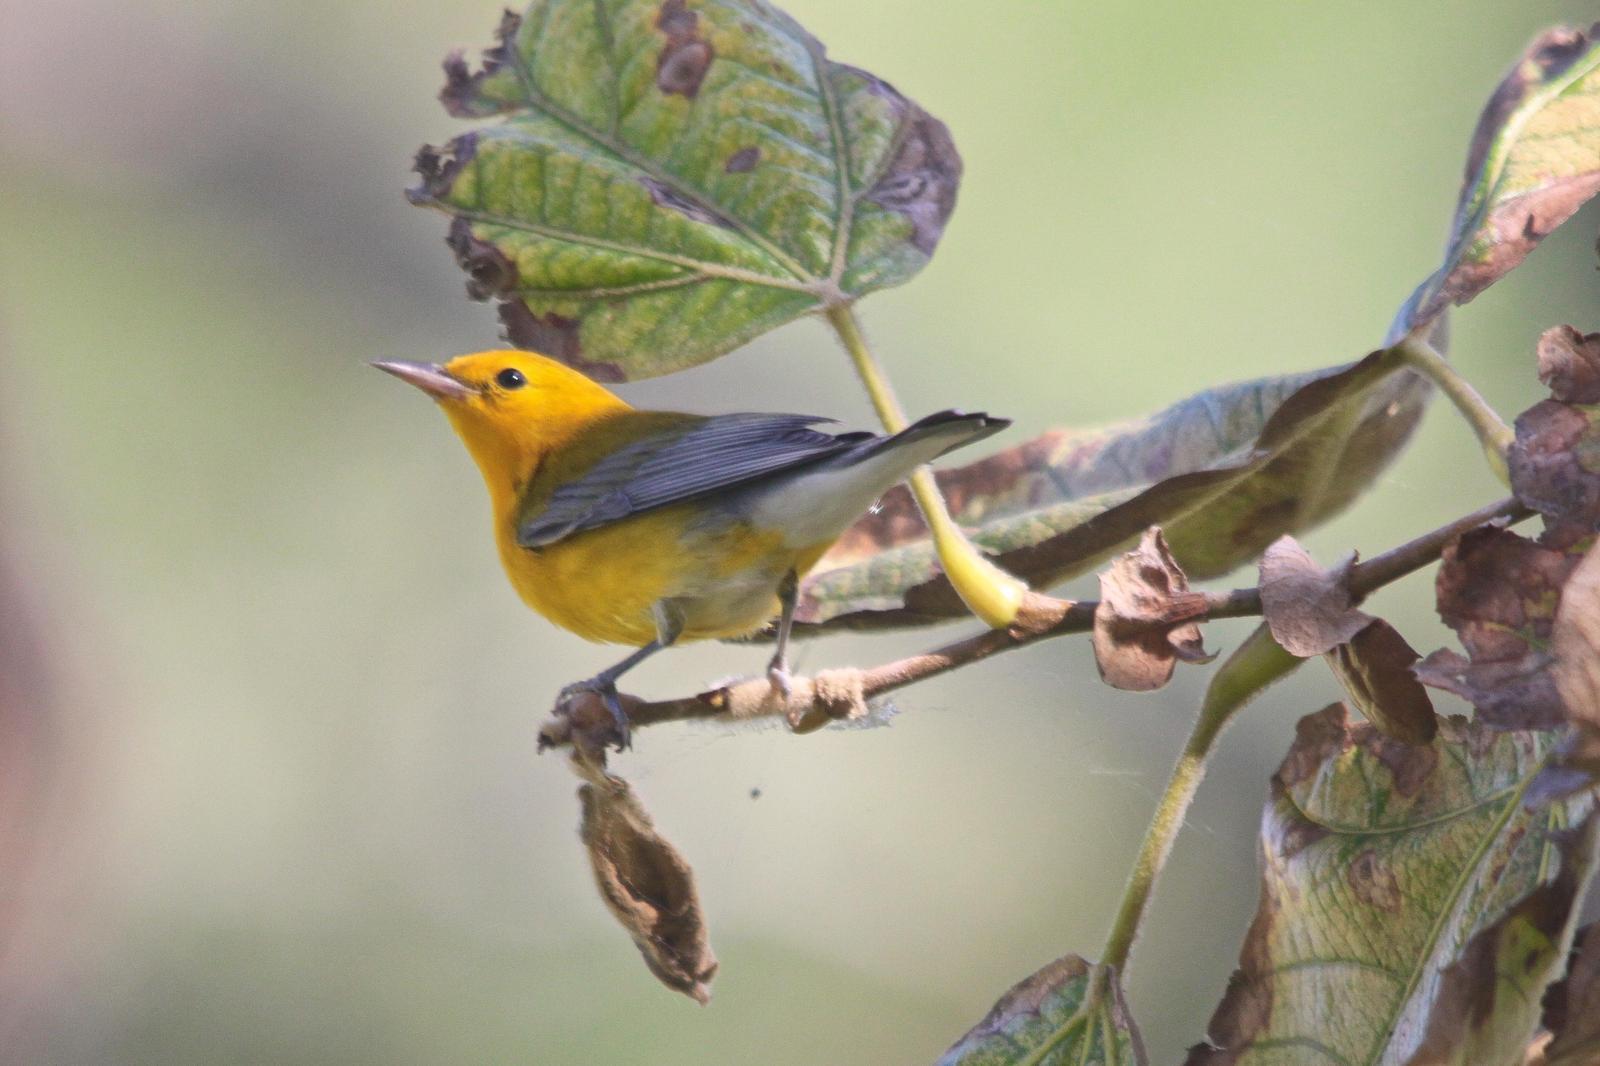 Prothonotary Warbler Photo by Tom Ford-Hutchinson